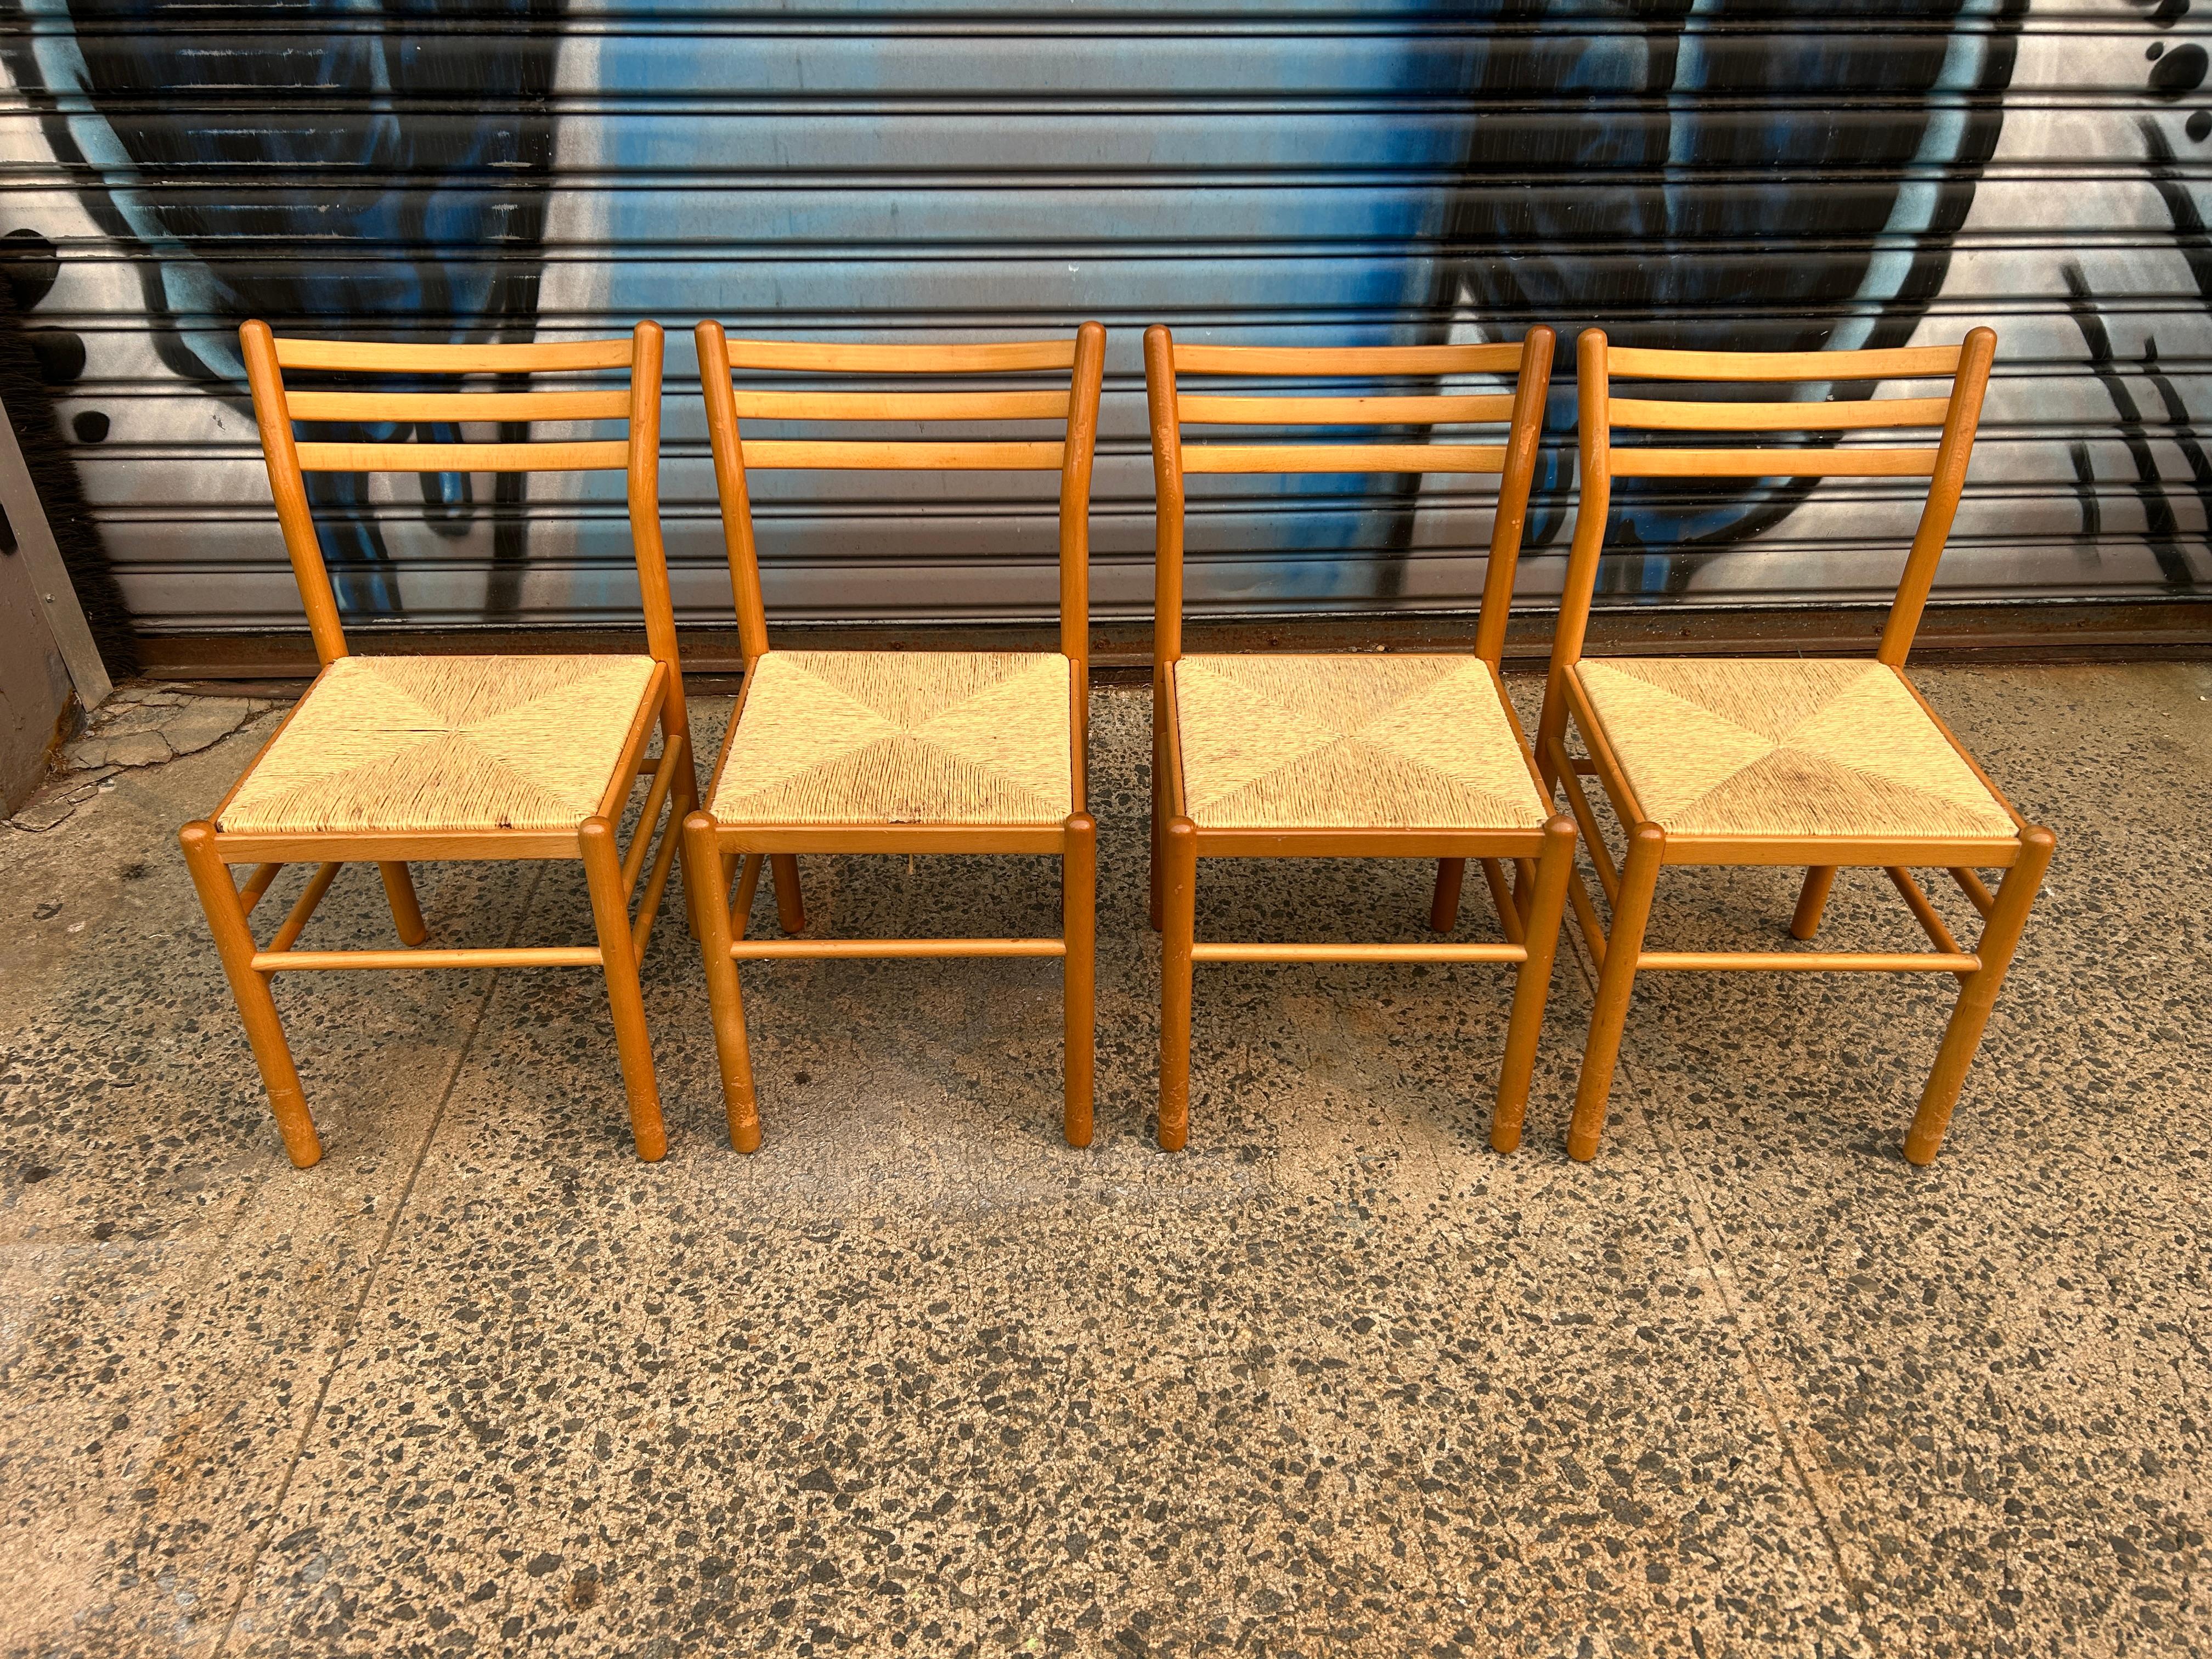 Set of 4 mid century modern birch rush dining chairs. Very simple dining chairs solid birch wood with rush seats. Minimalist design dining chairs. Made in Denmark. Located in Brooklyn NYC.

This listing is for (1) set of (4) chairs.